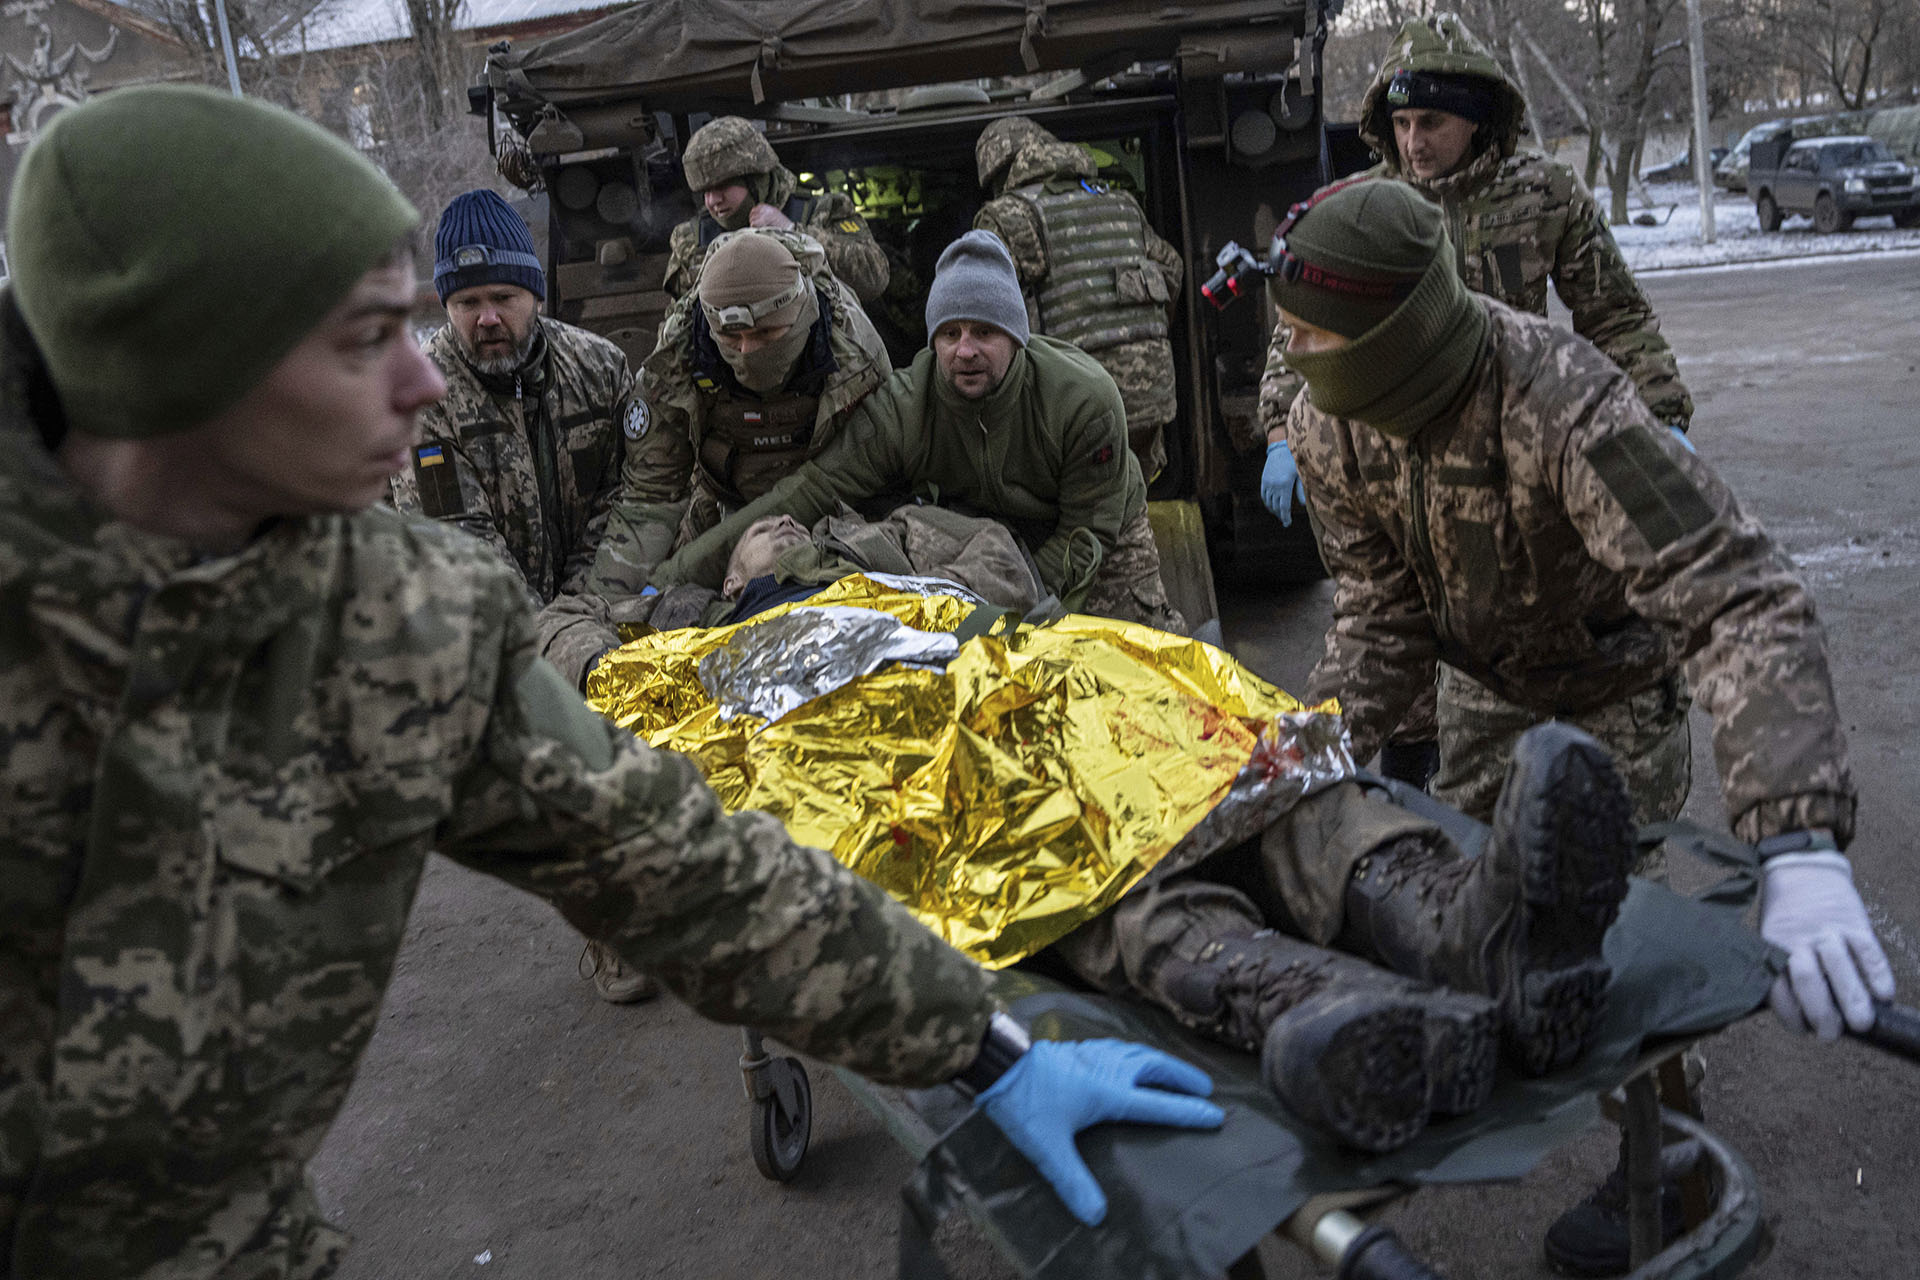 Ukrainian military medics carry a wounded Ukrainian serviceman evacuated from the battlefield to a hospital in Donetsk region, Ukraine, Monday, January 9, 2023. The serviceman did not survive.  (AP Photo/Evgeniy Maloletka)